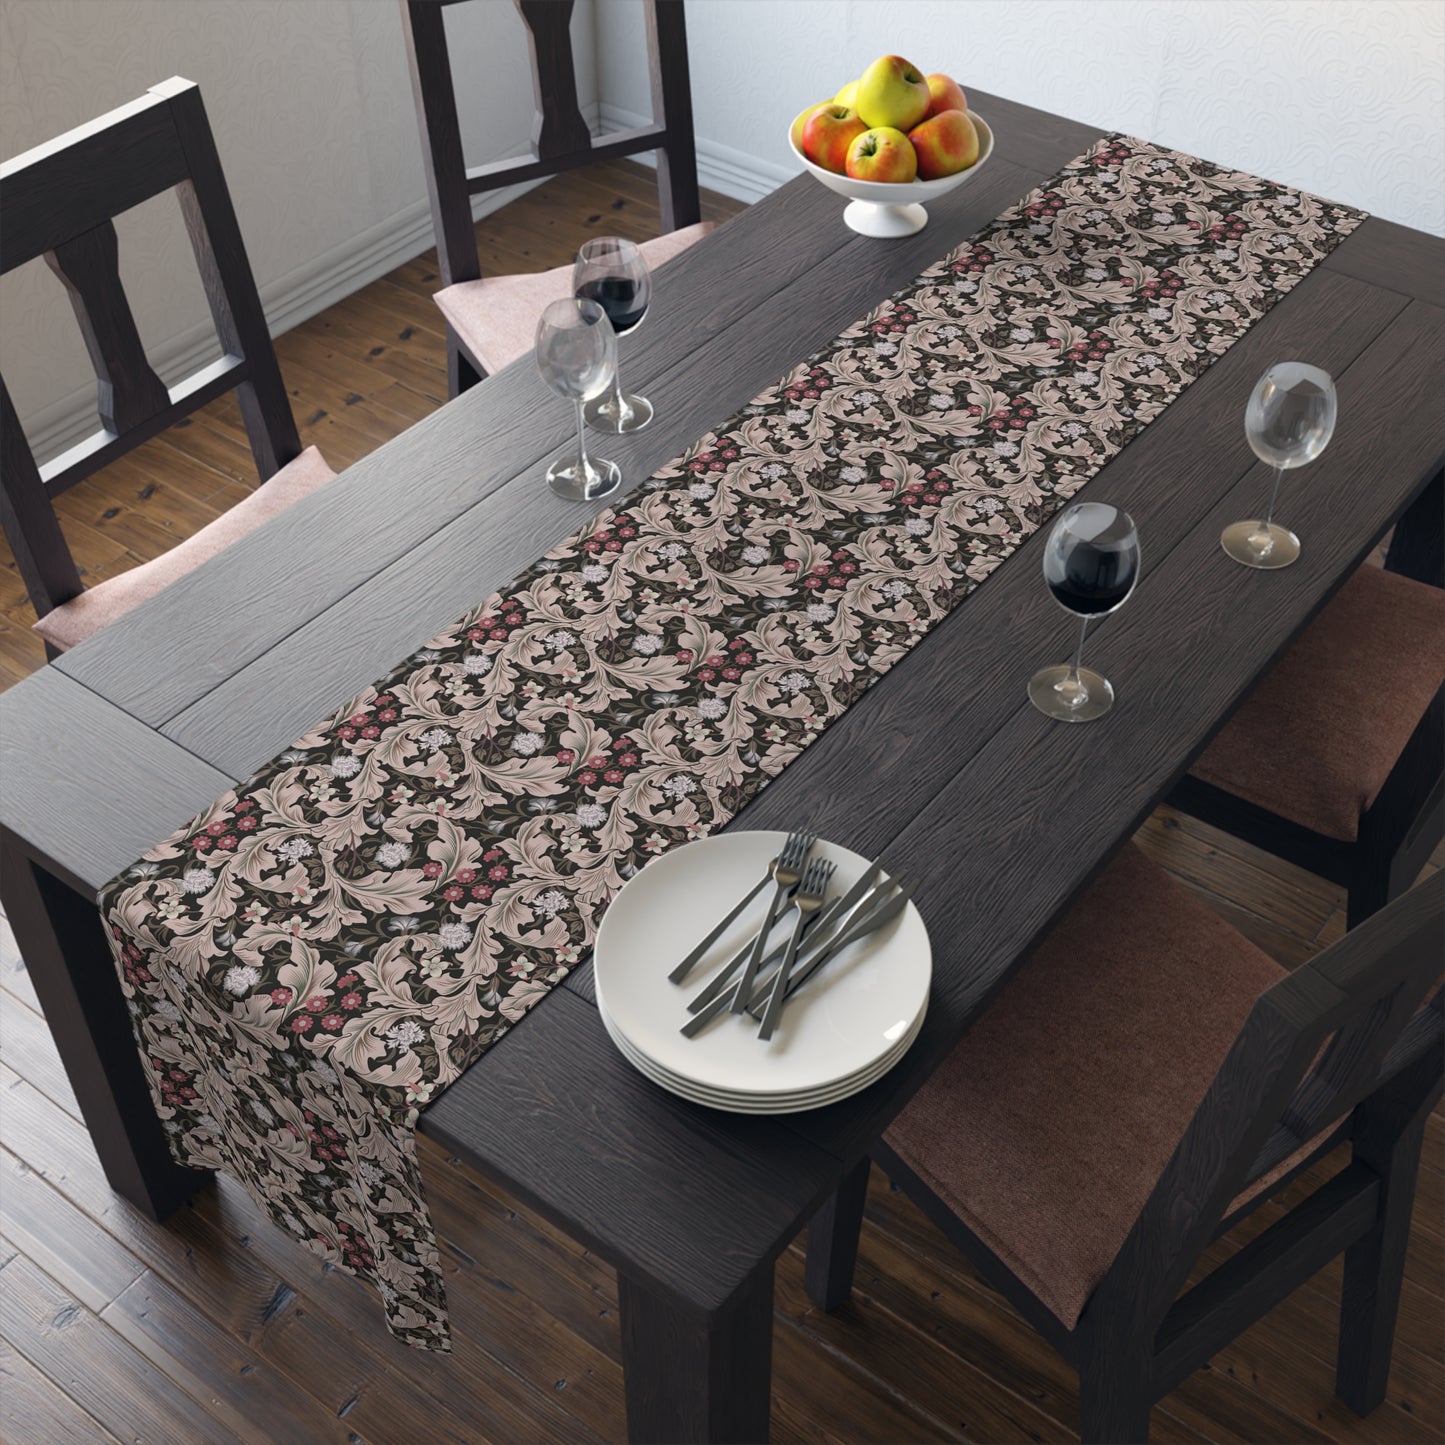 william-morris-co-table-runner-leicester-collection-mocha-6